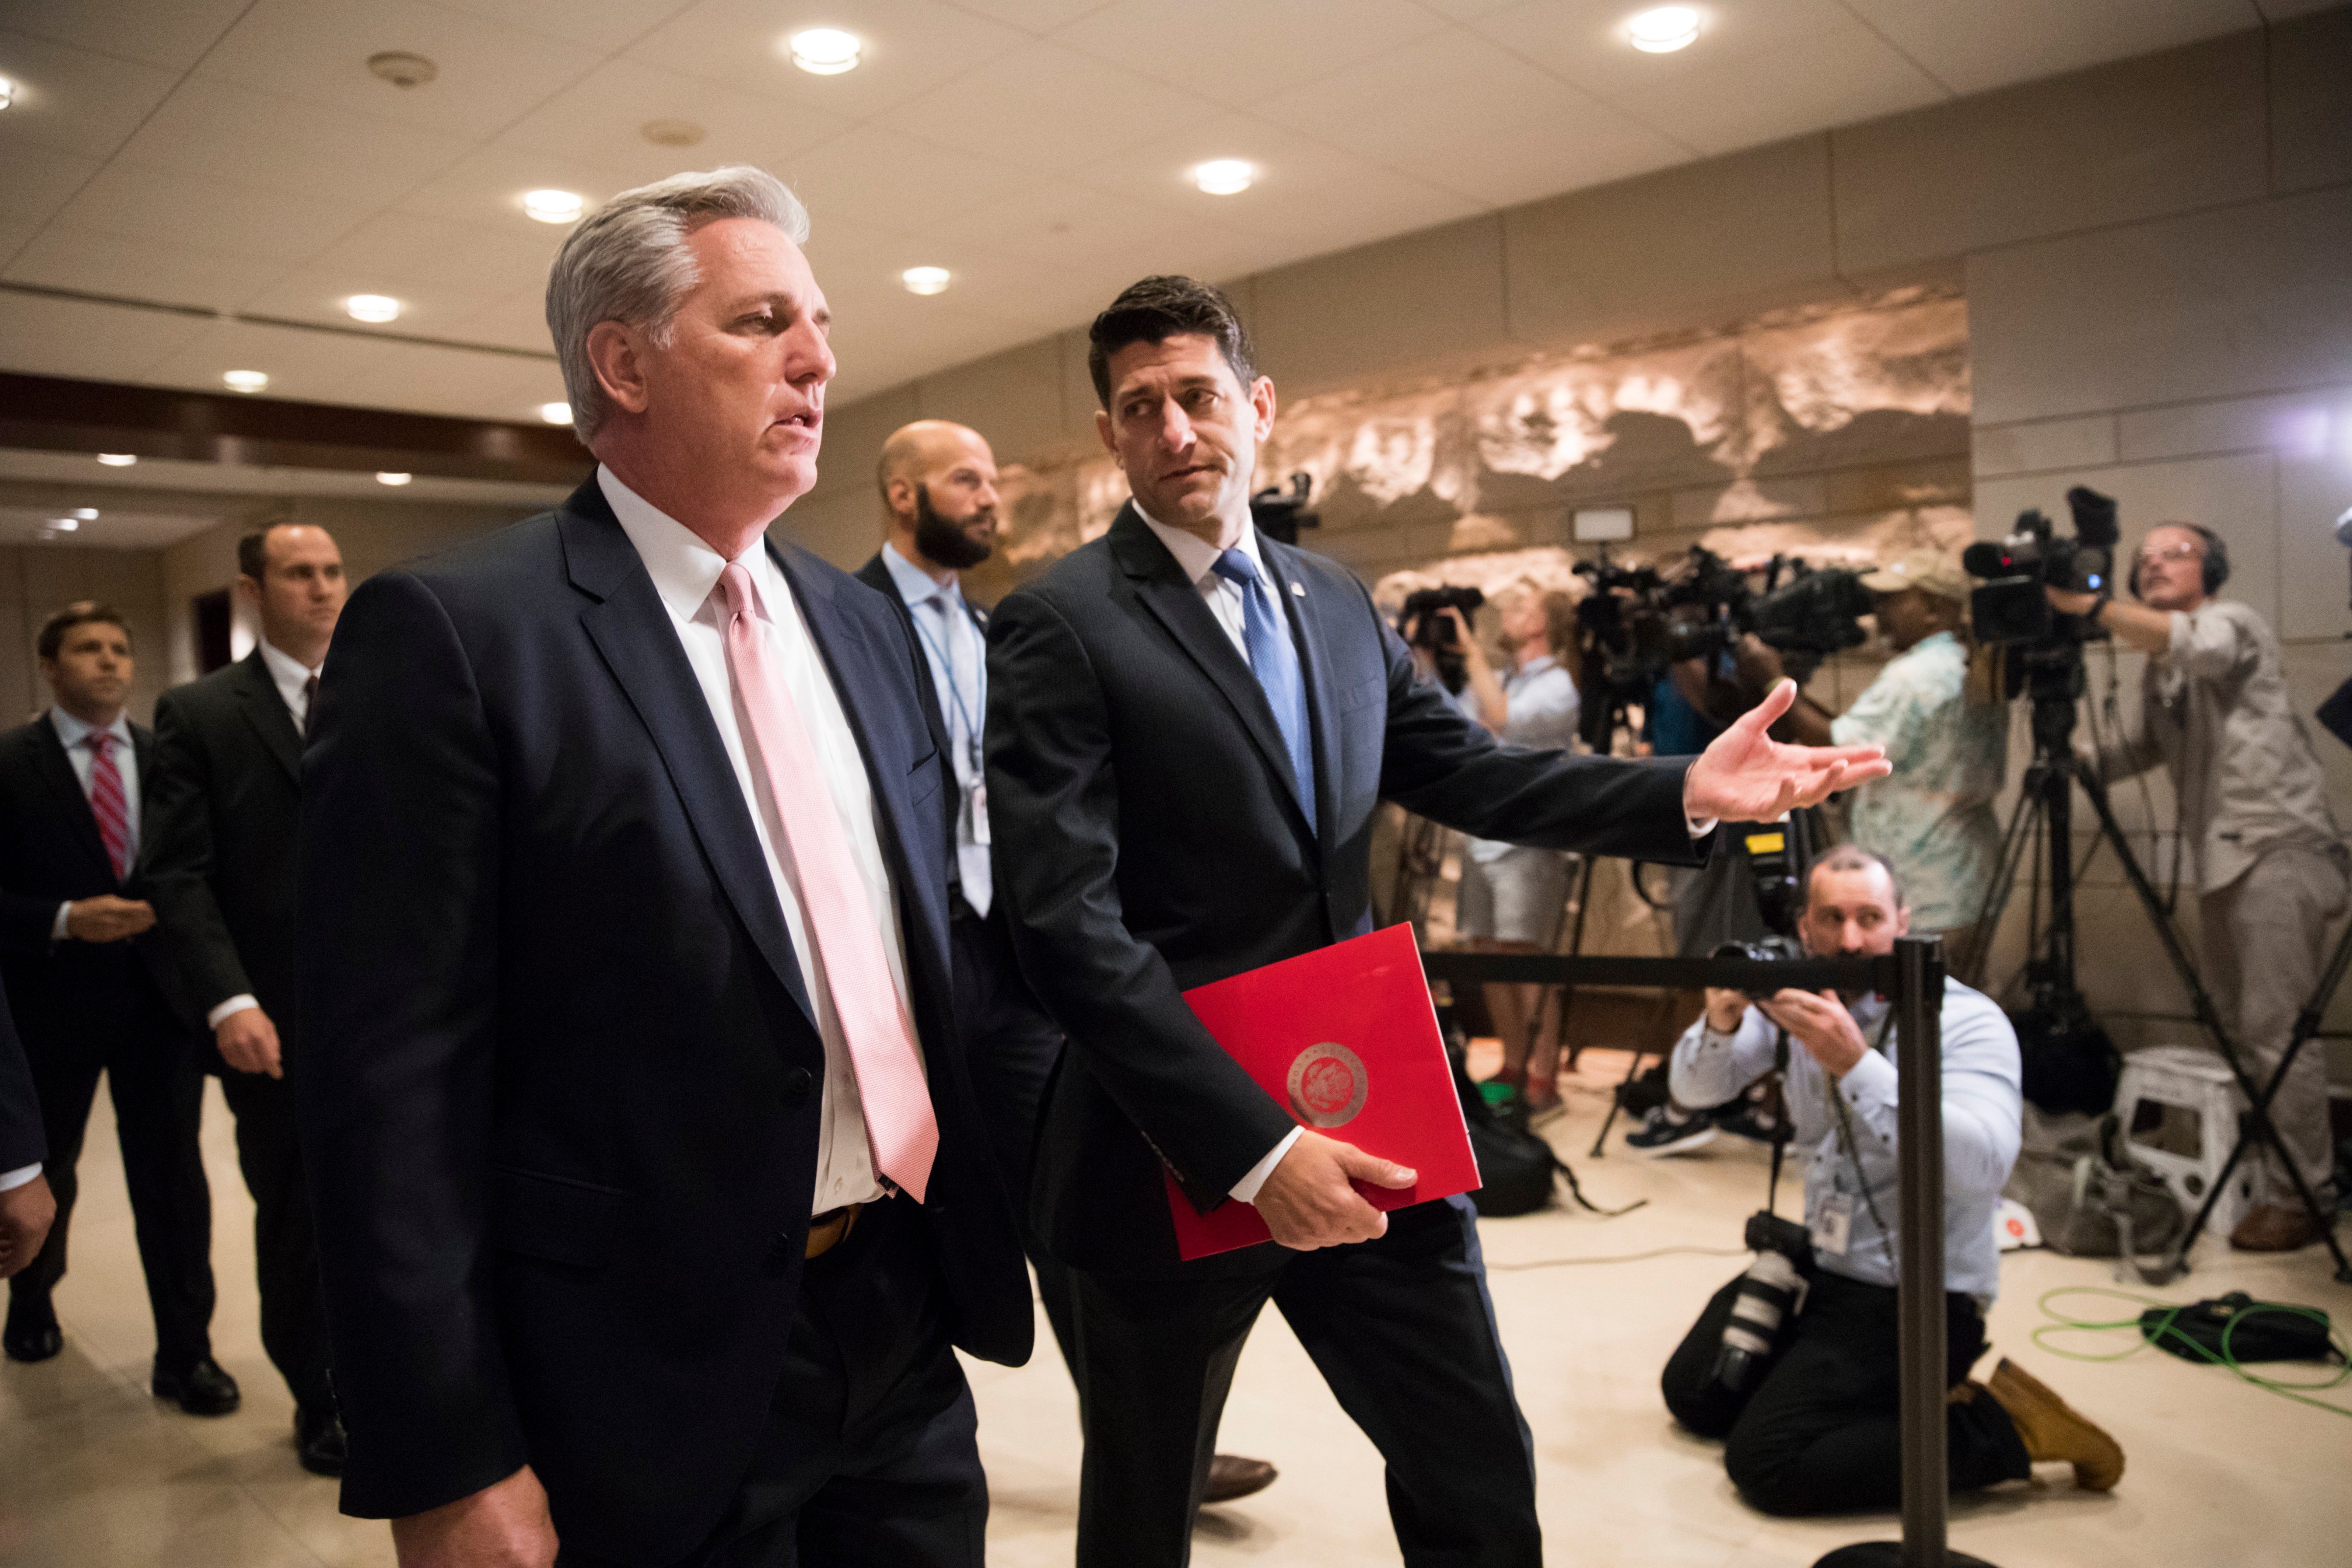 House Speaker Paul Ryan of Wis., right, and House Majority Leader Kevin McCarthy of Calif. walk to a security briefing for lawmakers on Capitol Hill in Washington on June 14, 2017, after a gunman opened fire wounding House Majority Whip Rep. Steve Scalise of La., and others during a Congressional baseball practice in Alexandria, Va. (J. Scott Applewhite&mdash;AP)